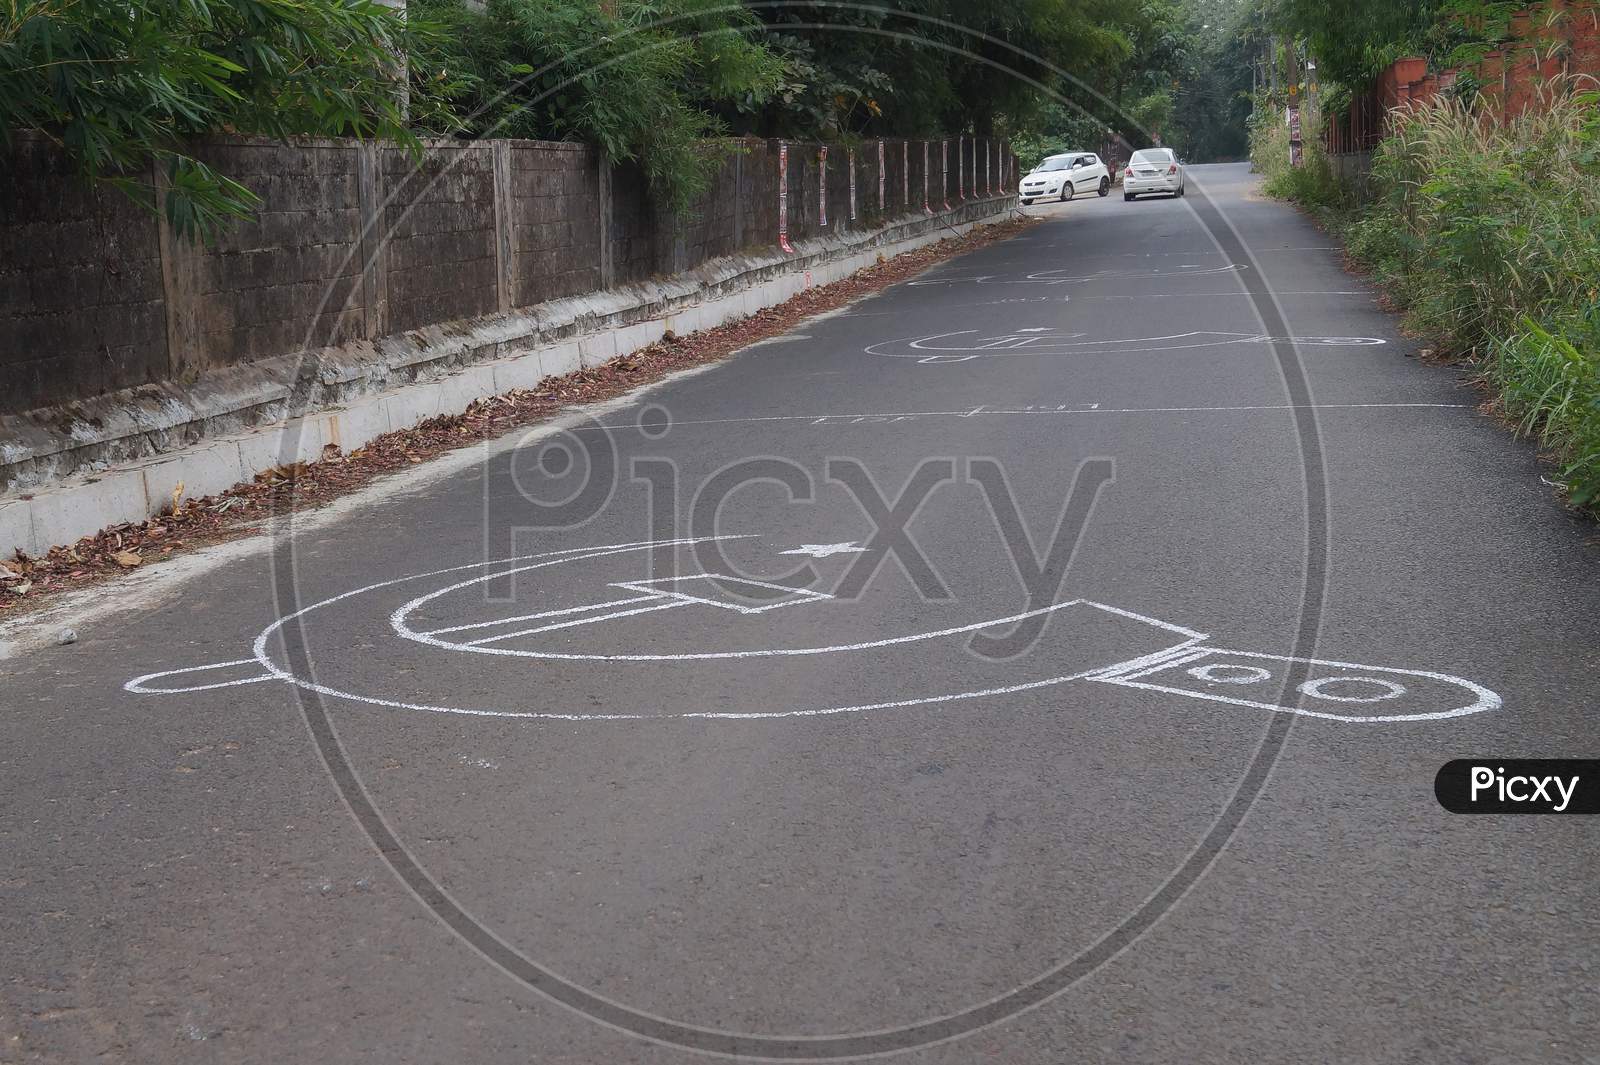 Thrissur, Kerala, India - 12-02-2020: Communist Party Logo Sketch On The Road In Kerala.The Election To The Three-Tier Local Local Body System To Be Held In Three Phases In December.